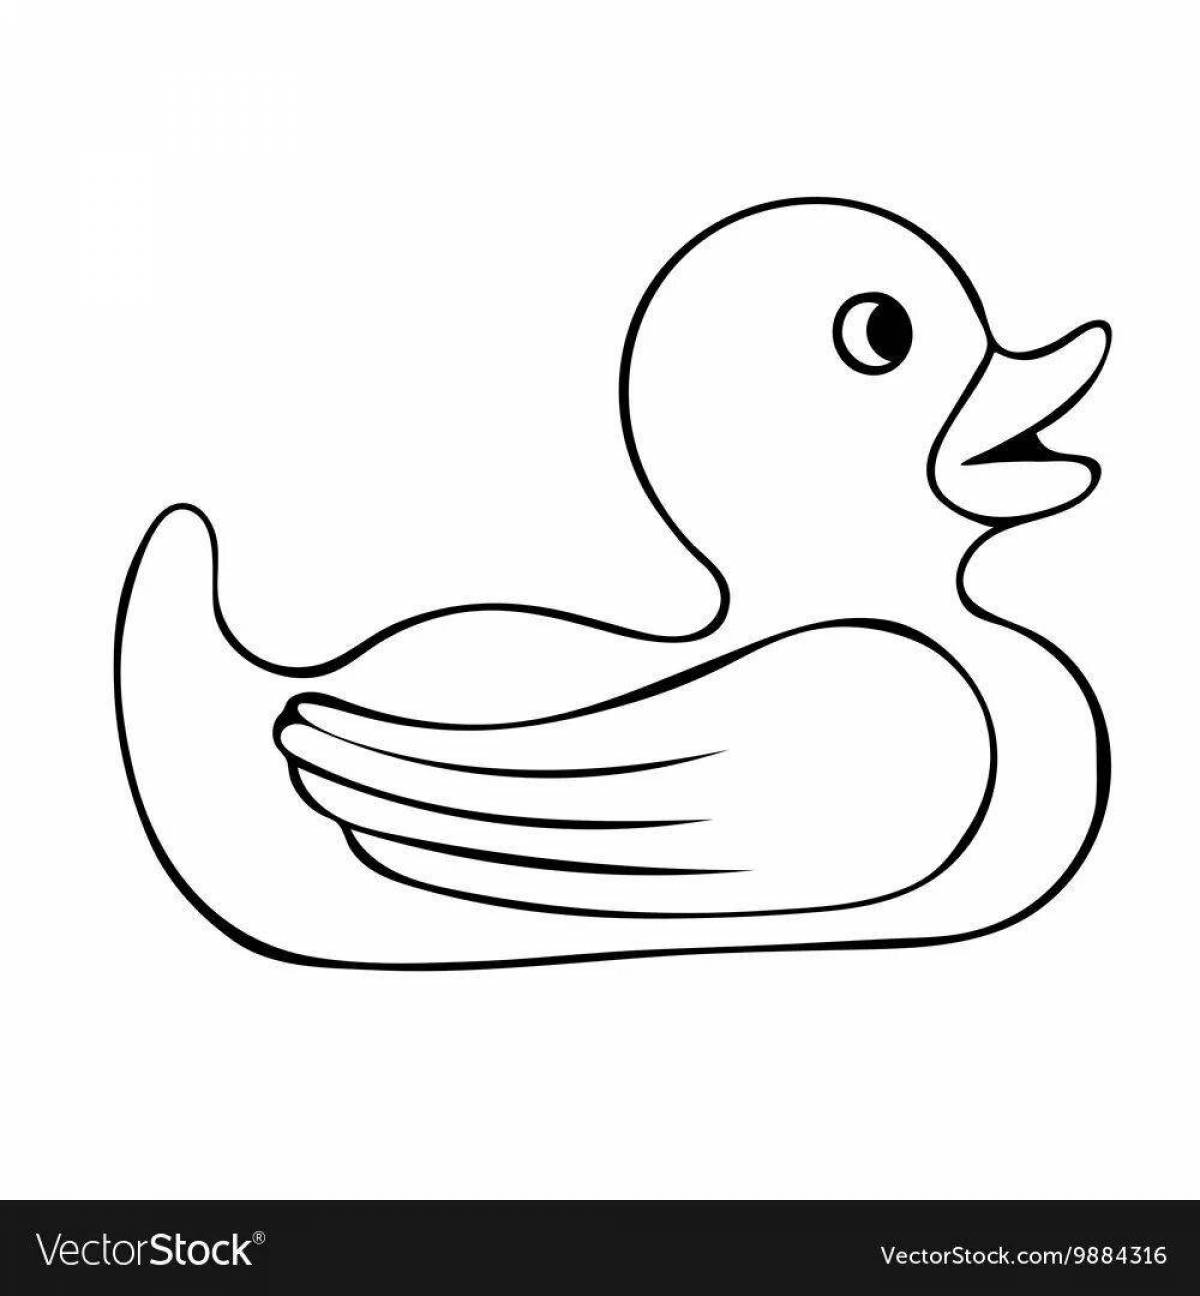 Coloring page witty duck